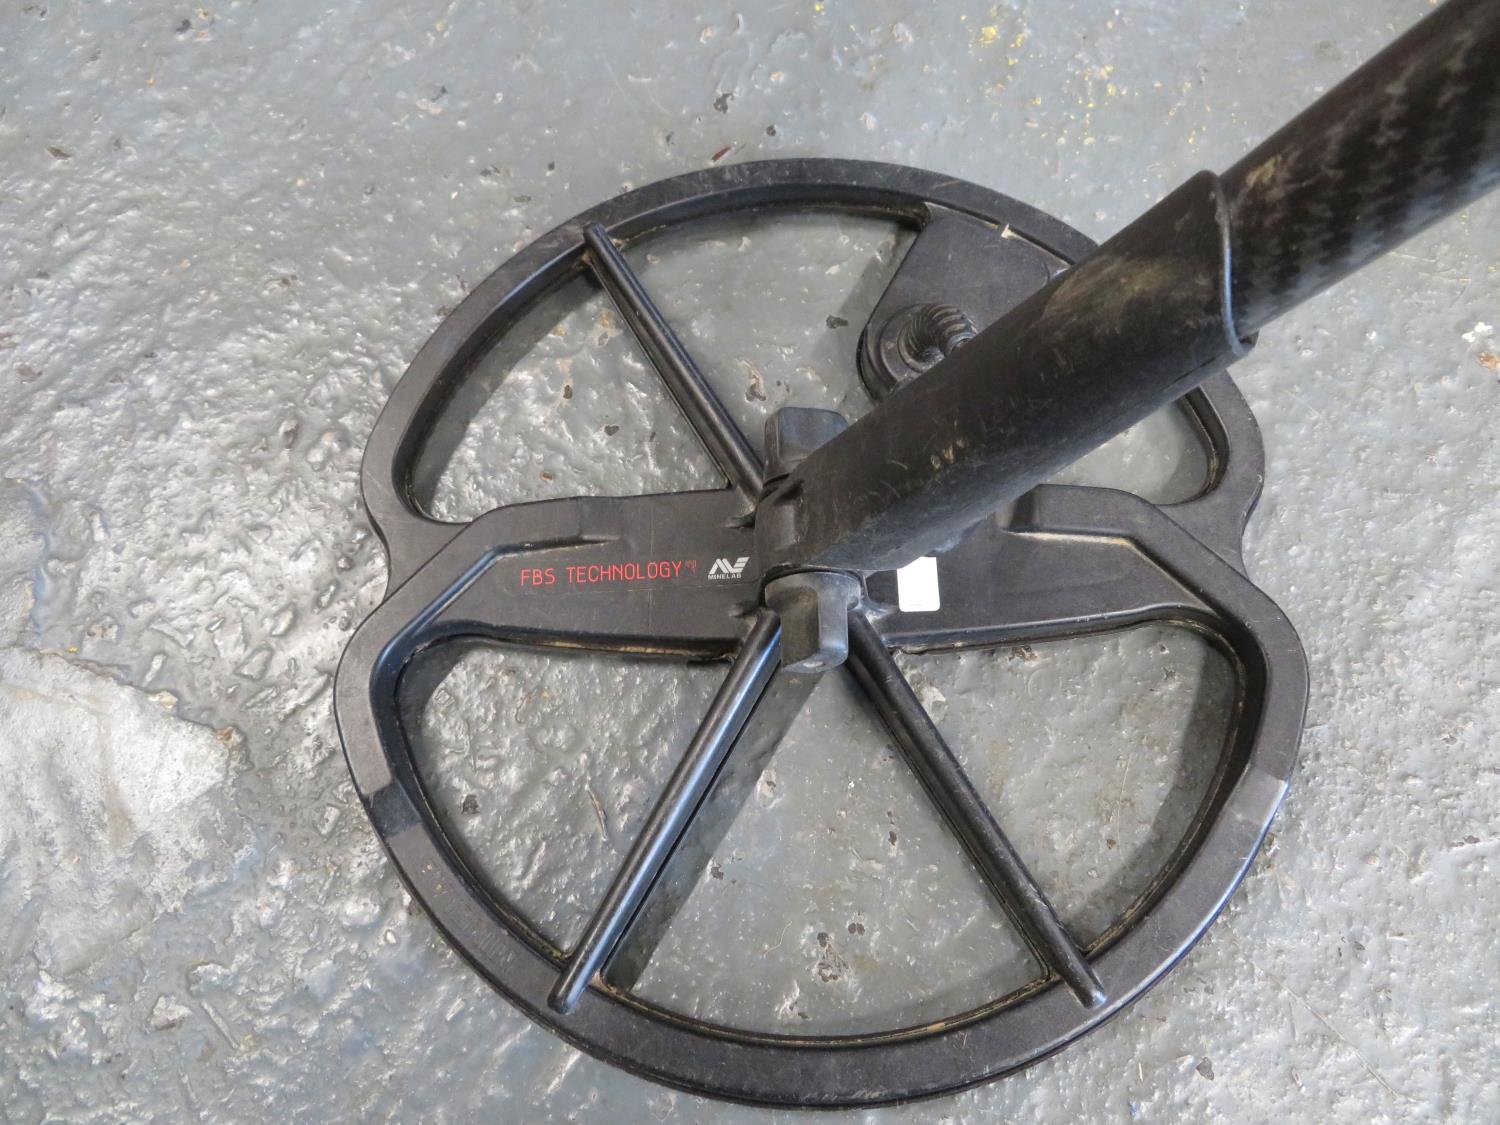 Minelab E-trac metal detector in full working order with headphones, dustcover and battery charger - Bild 5 aus 6